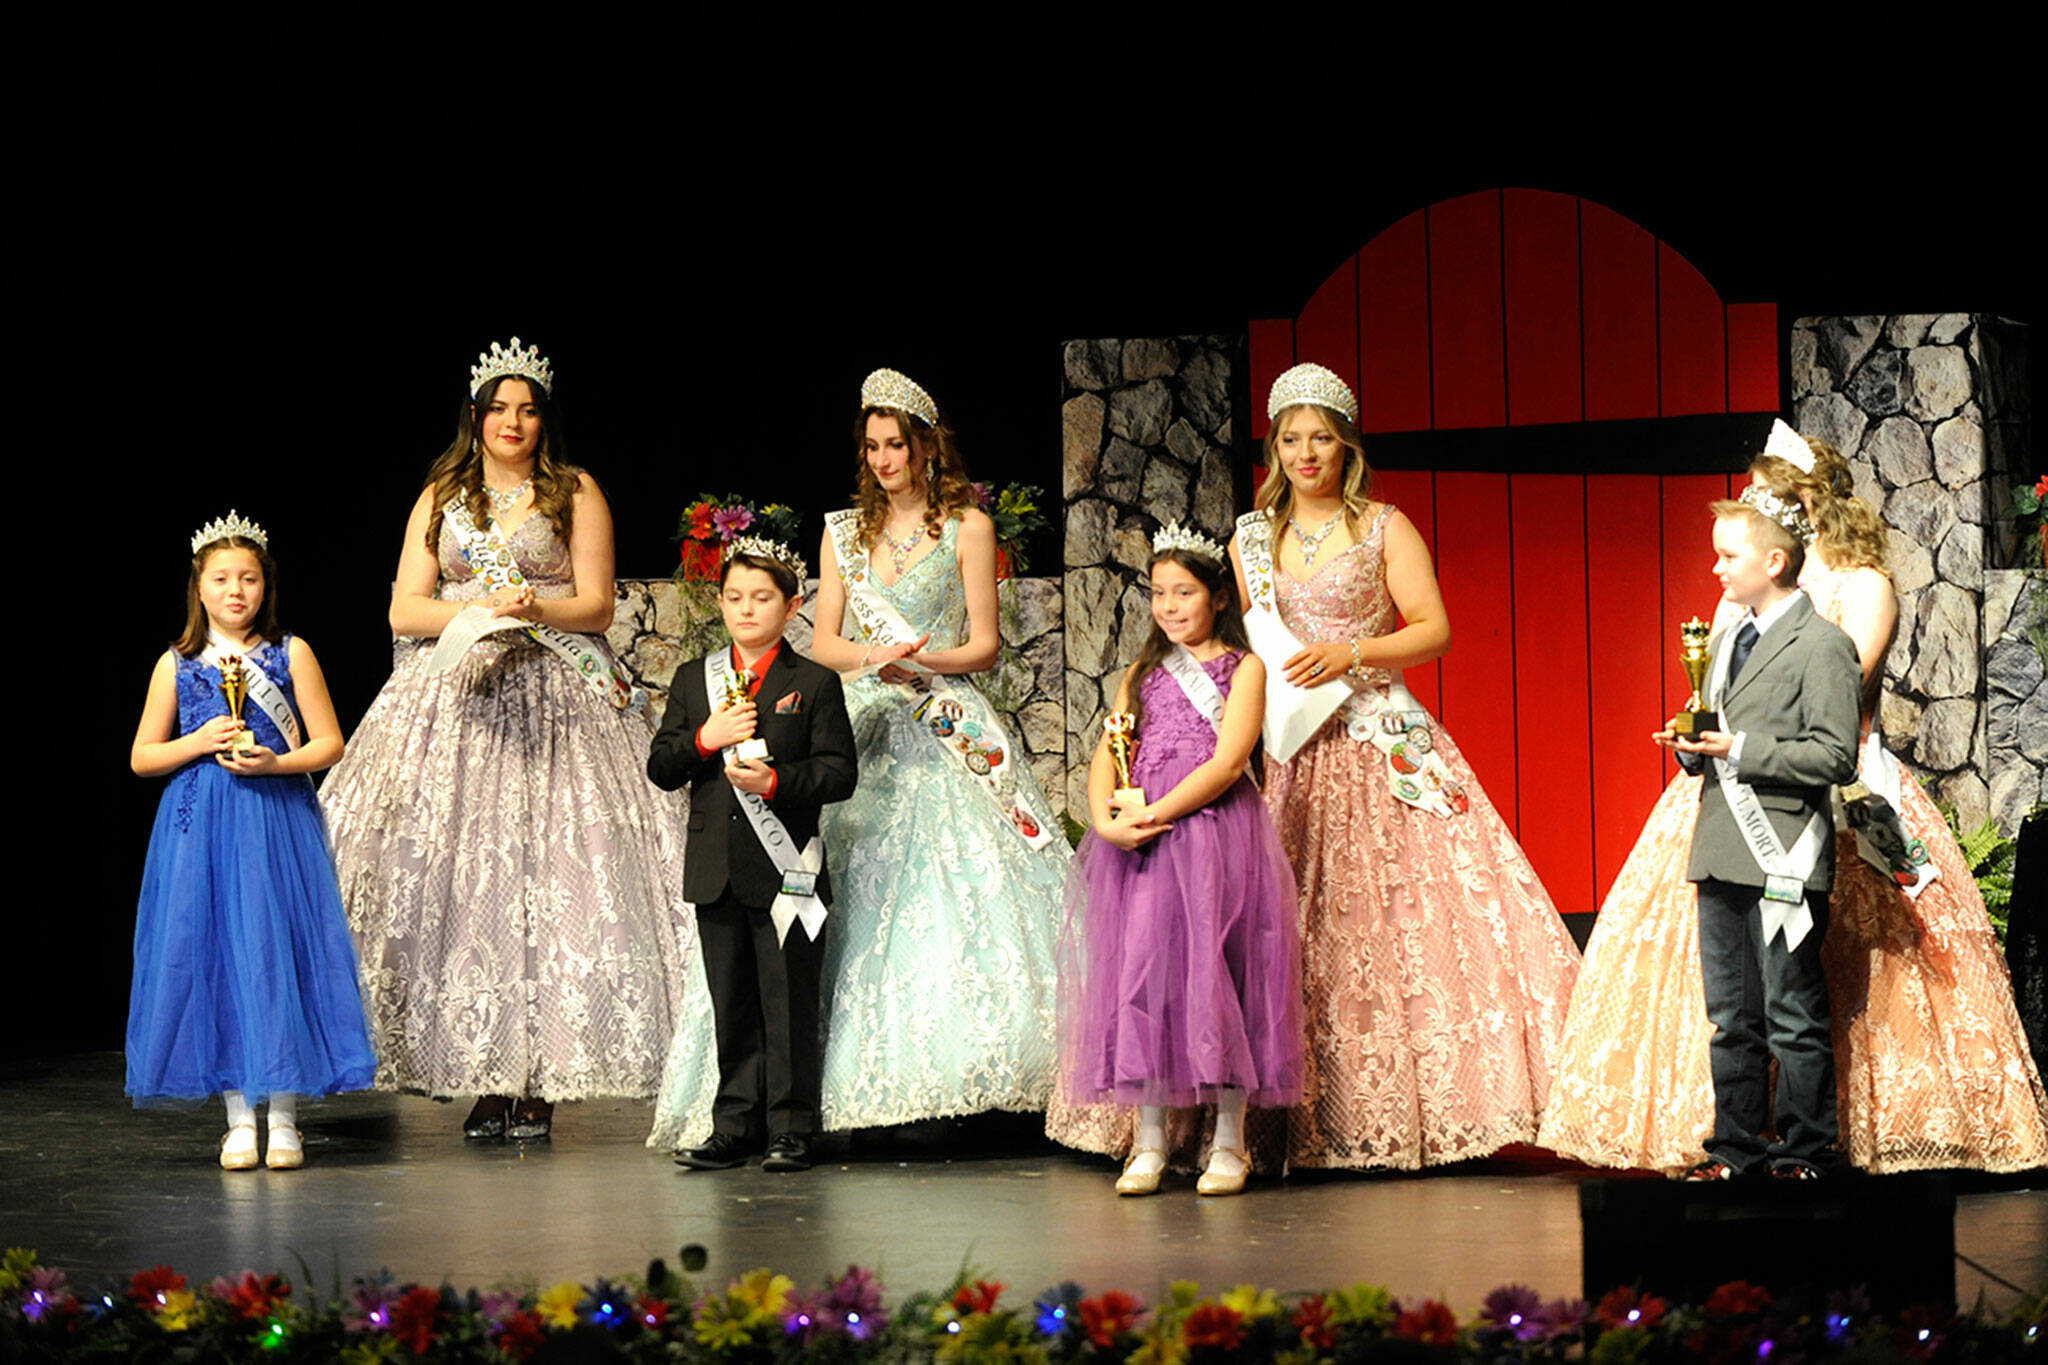 2022 Sequim Irrigation Festival royalty (back row, from left) queen Isabella Williams, princess Katherine Gould, princess Ellie Turner, and princess Lauren Willis, crown the 2023 Junior Royalty. They include, from front left, Sofia Lopez and Greyson Rhodes of Greywolf Elementary, and Lynn Westman and Grayson Castell of Helen Haller Elementary.